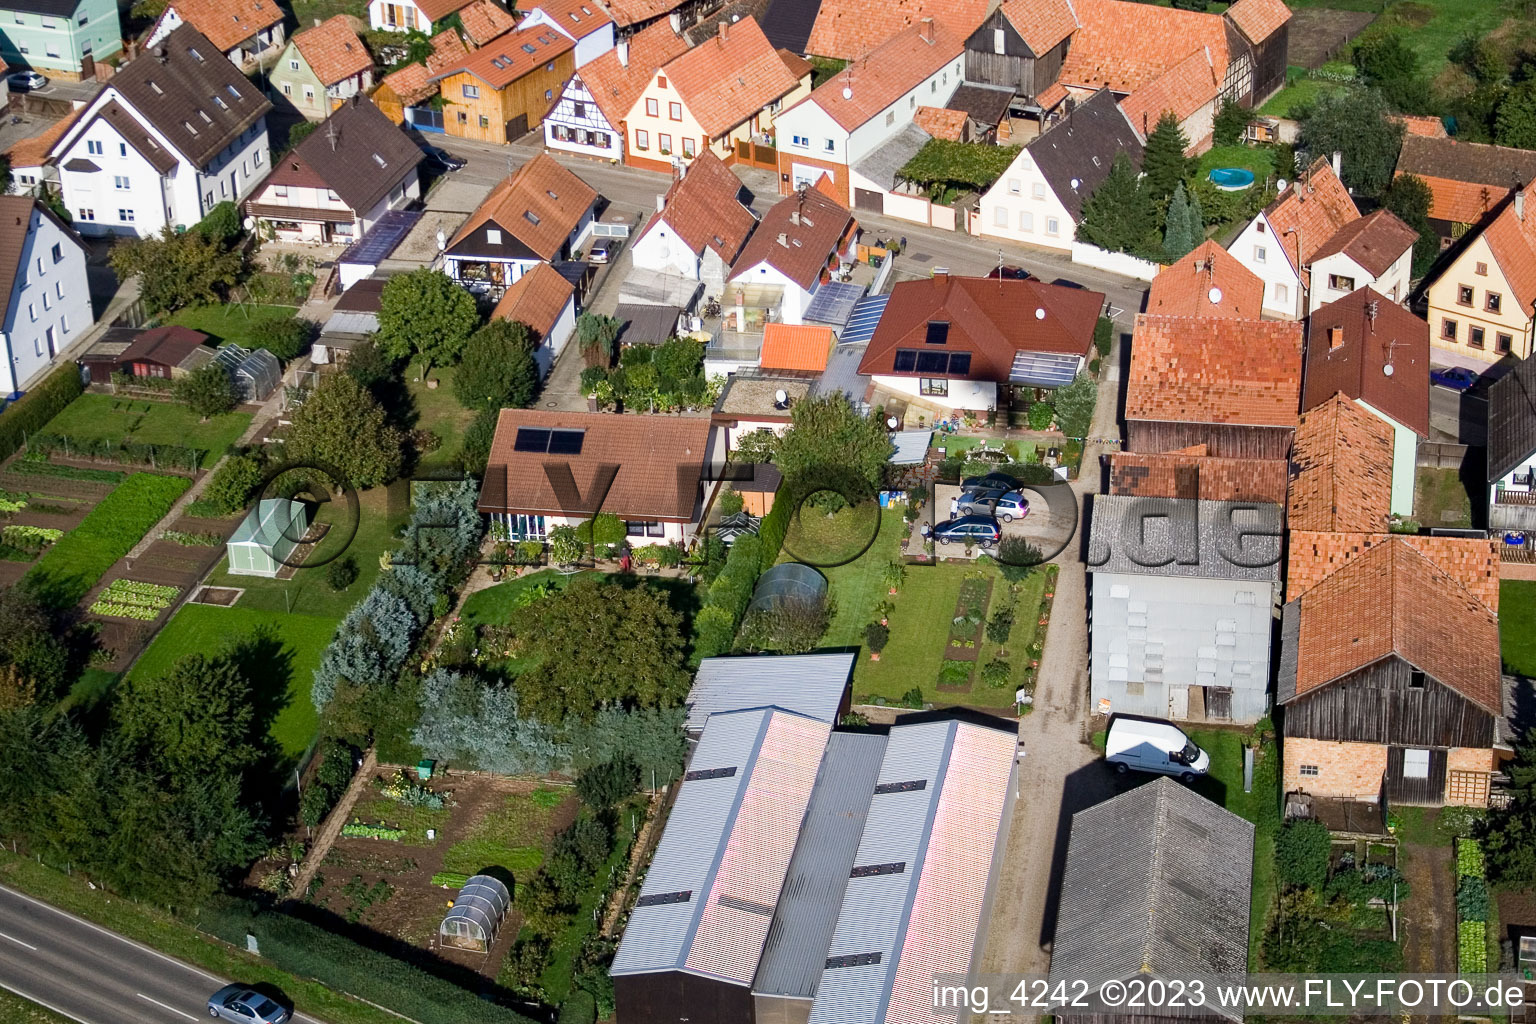 Bird's eye view of Brehmstr in the district Minderslachen in Kandel in the state Rhineland-Palatinate, Germany